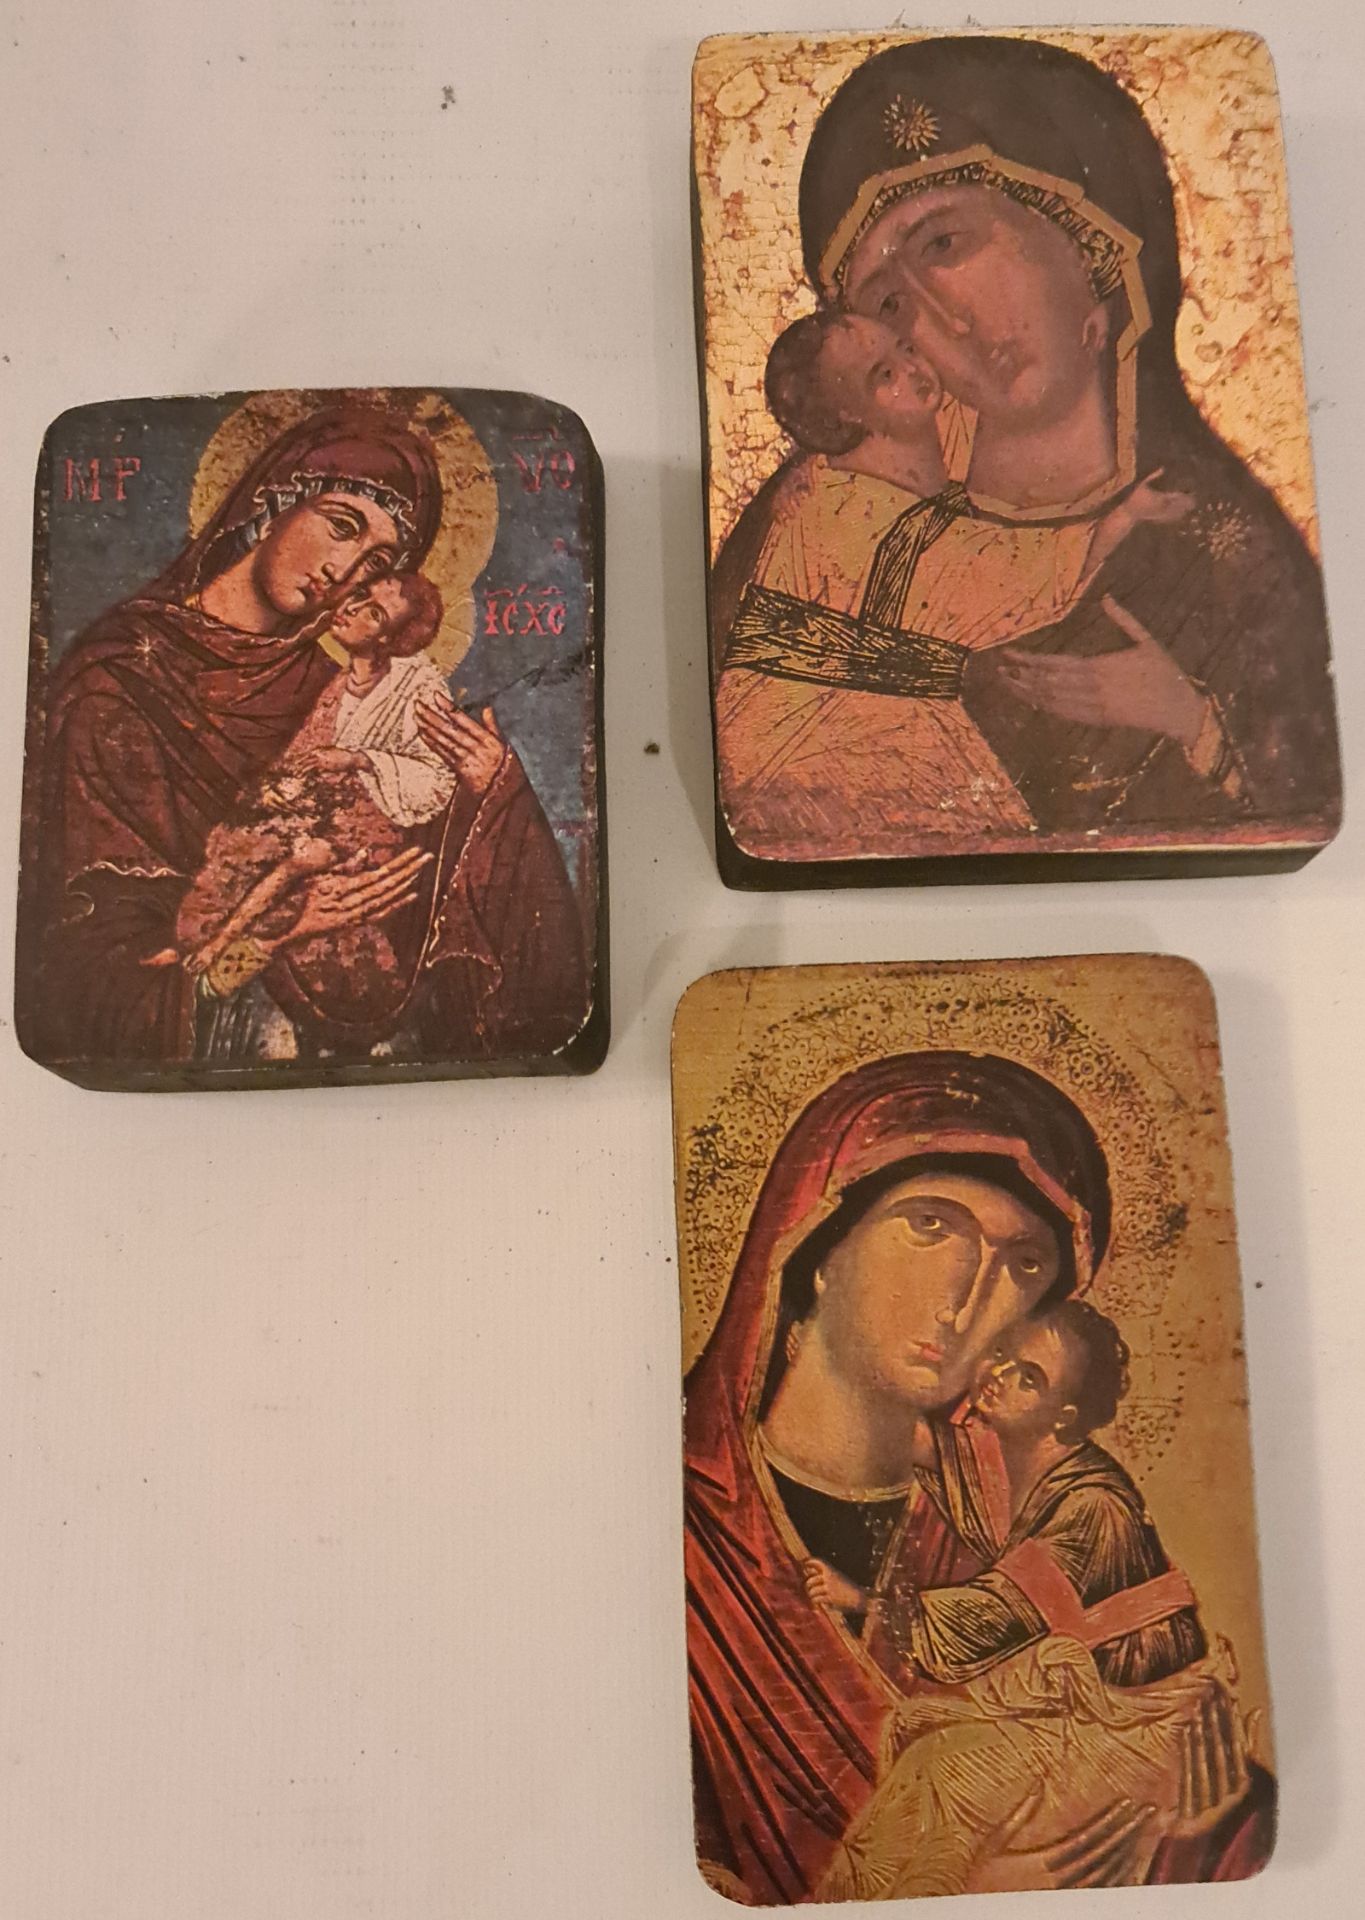 Vintage 3 x Religious Icons. Vintage 3 x Religious Icons.The largest measures 3 inches by 4.5